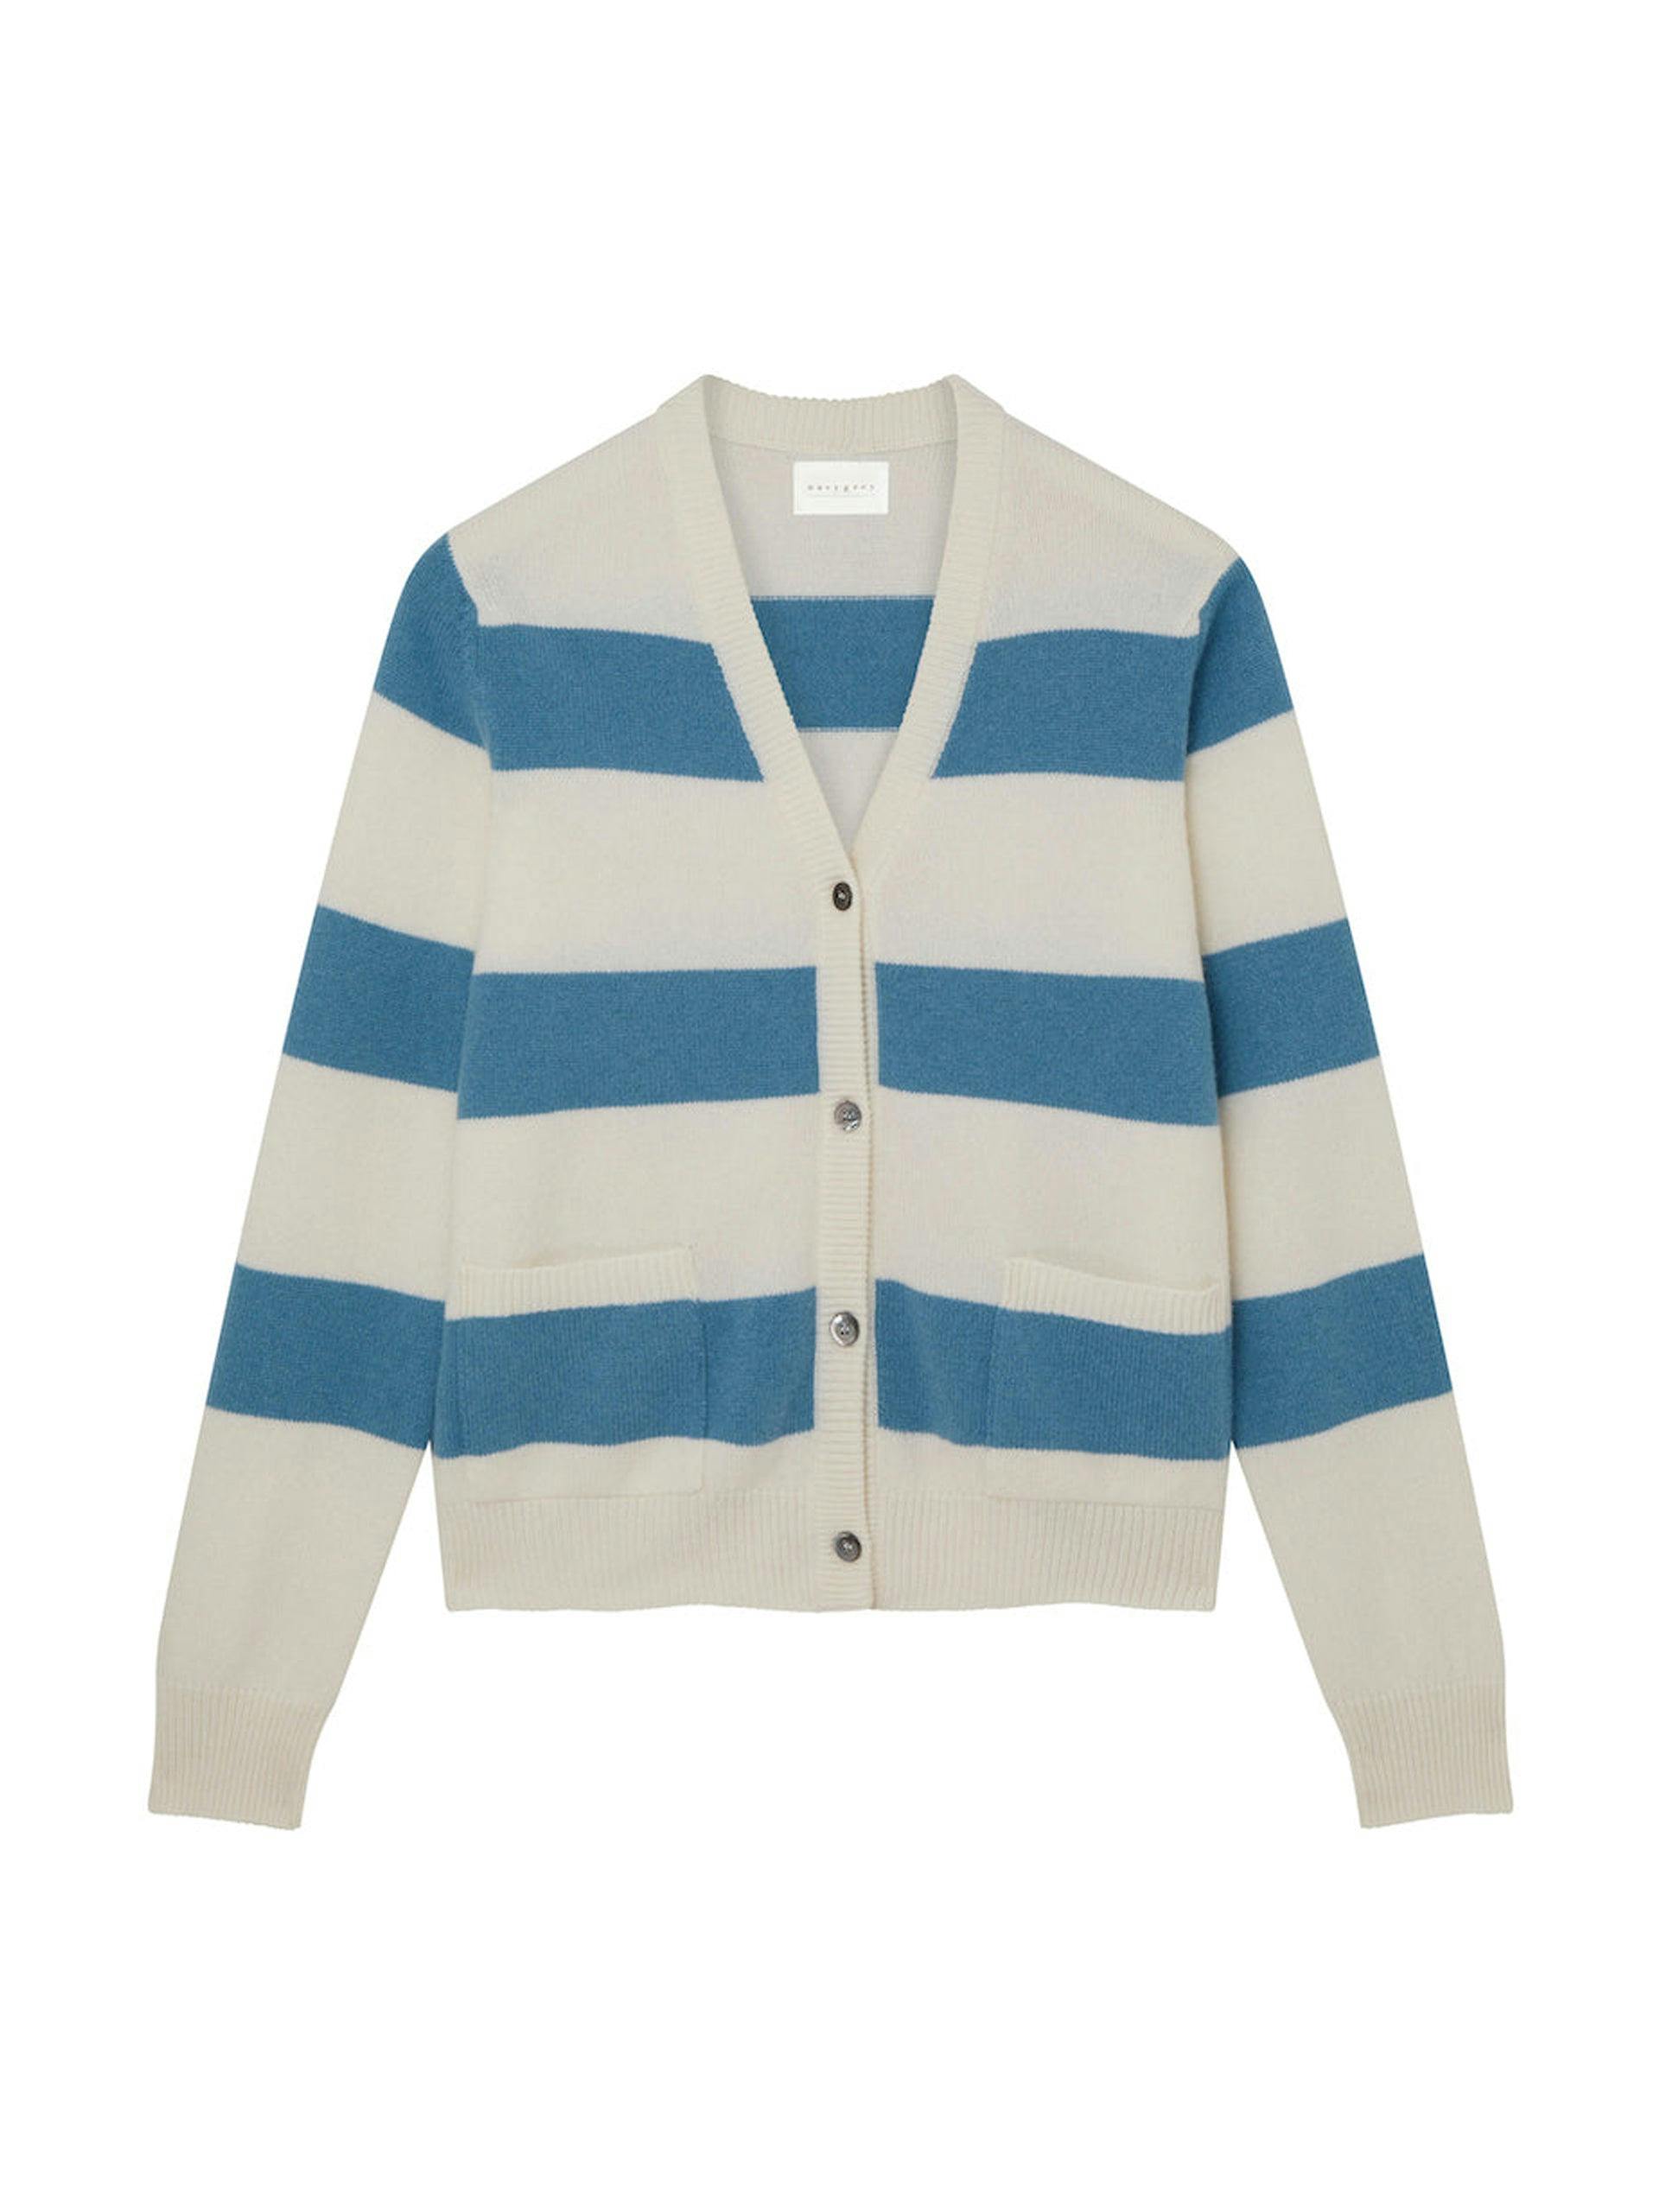 The Cardigan in morning blue and summer white